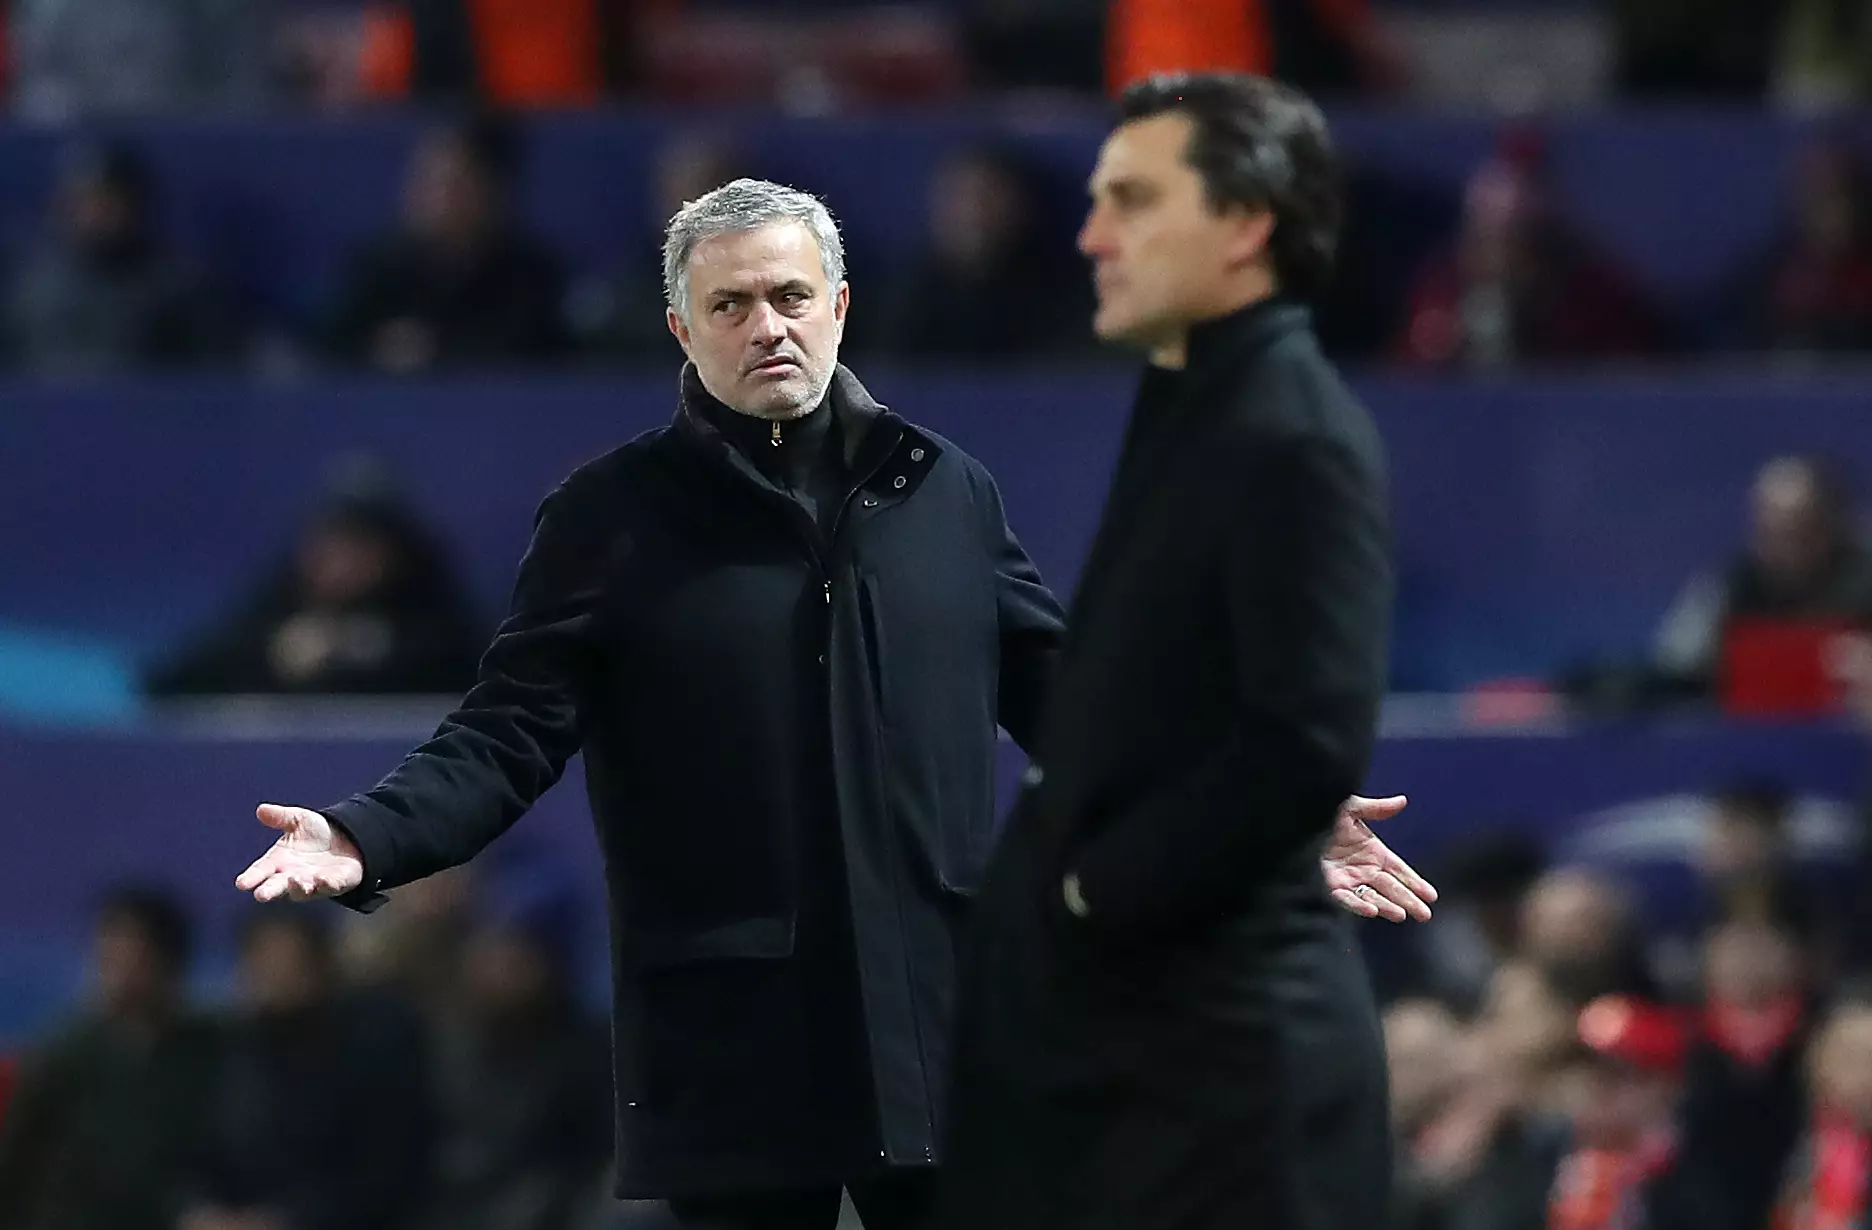 Mourinho gestures on the touchline. Image: PA